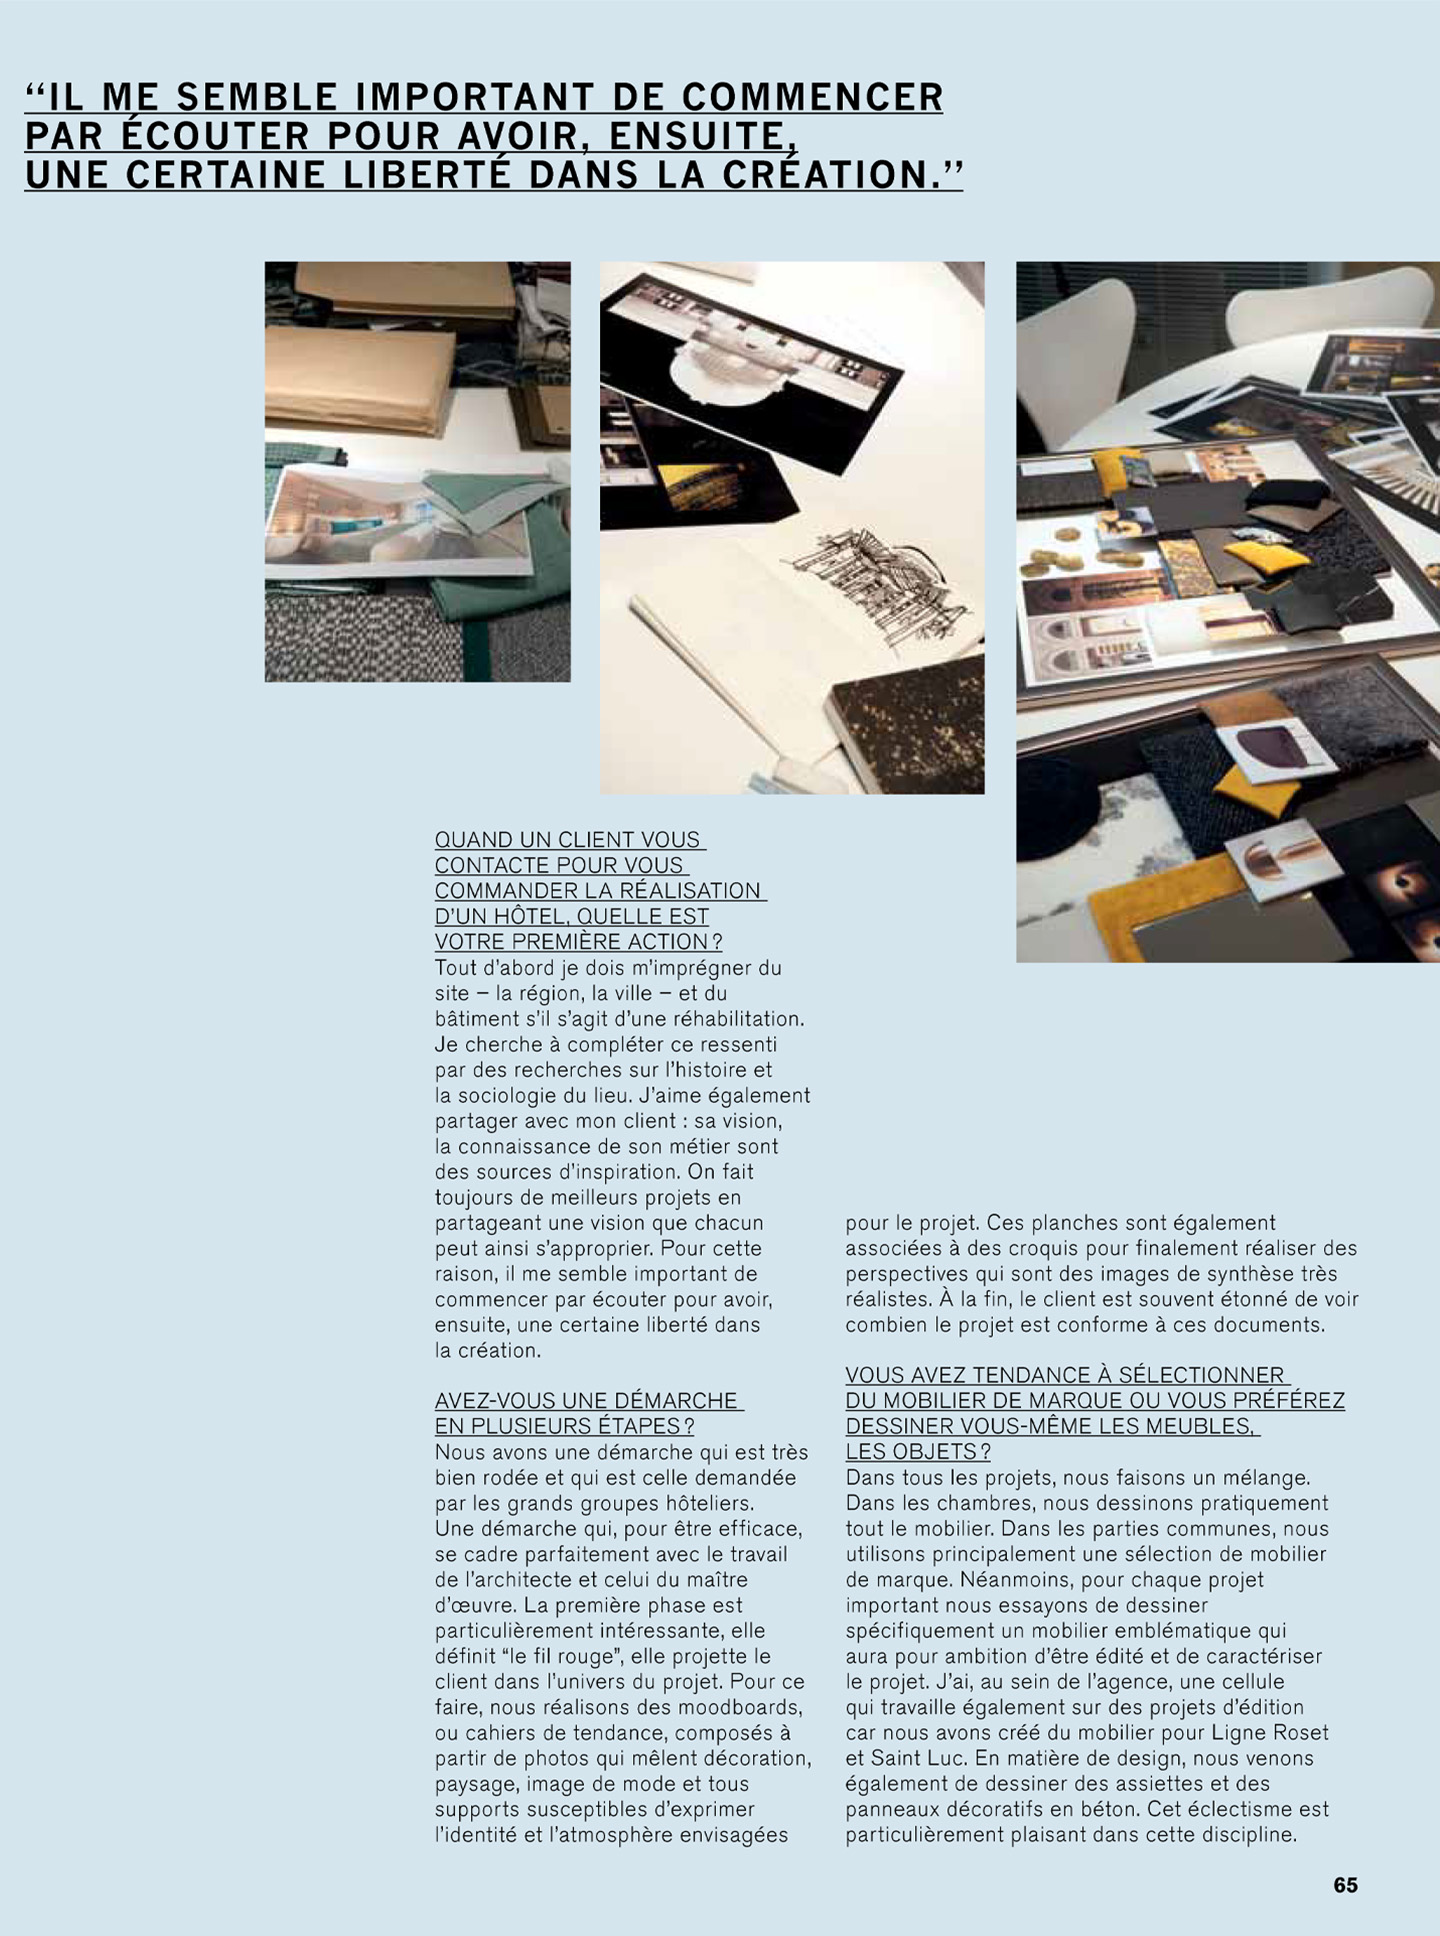 Article on the interior design studio specialized in luxury hotels jean-philippe nuel in the magazine L'officiel voyage